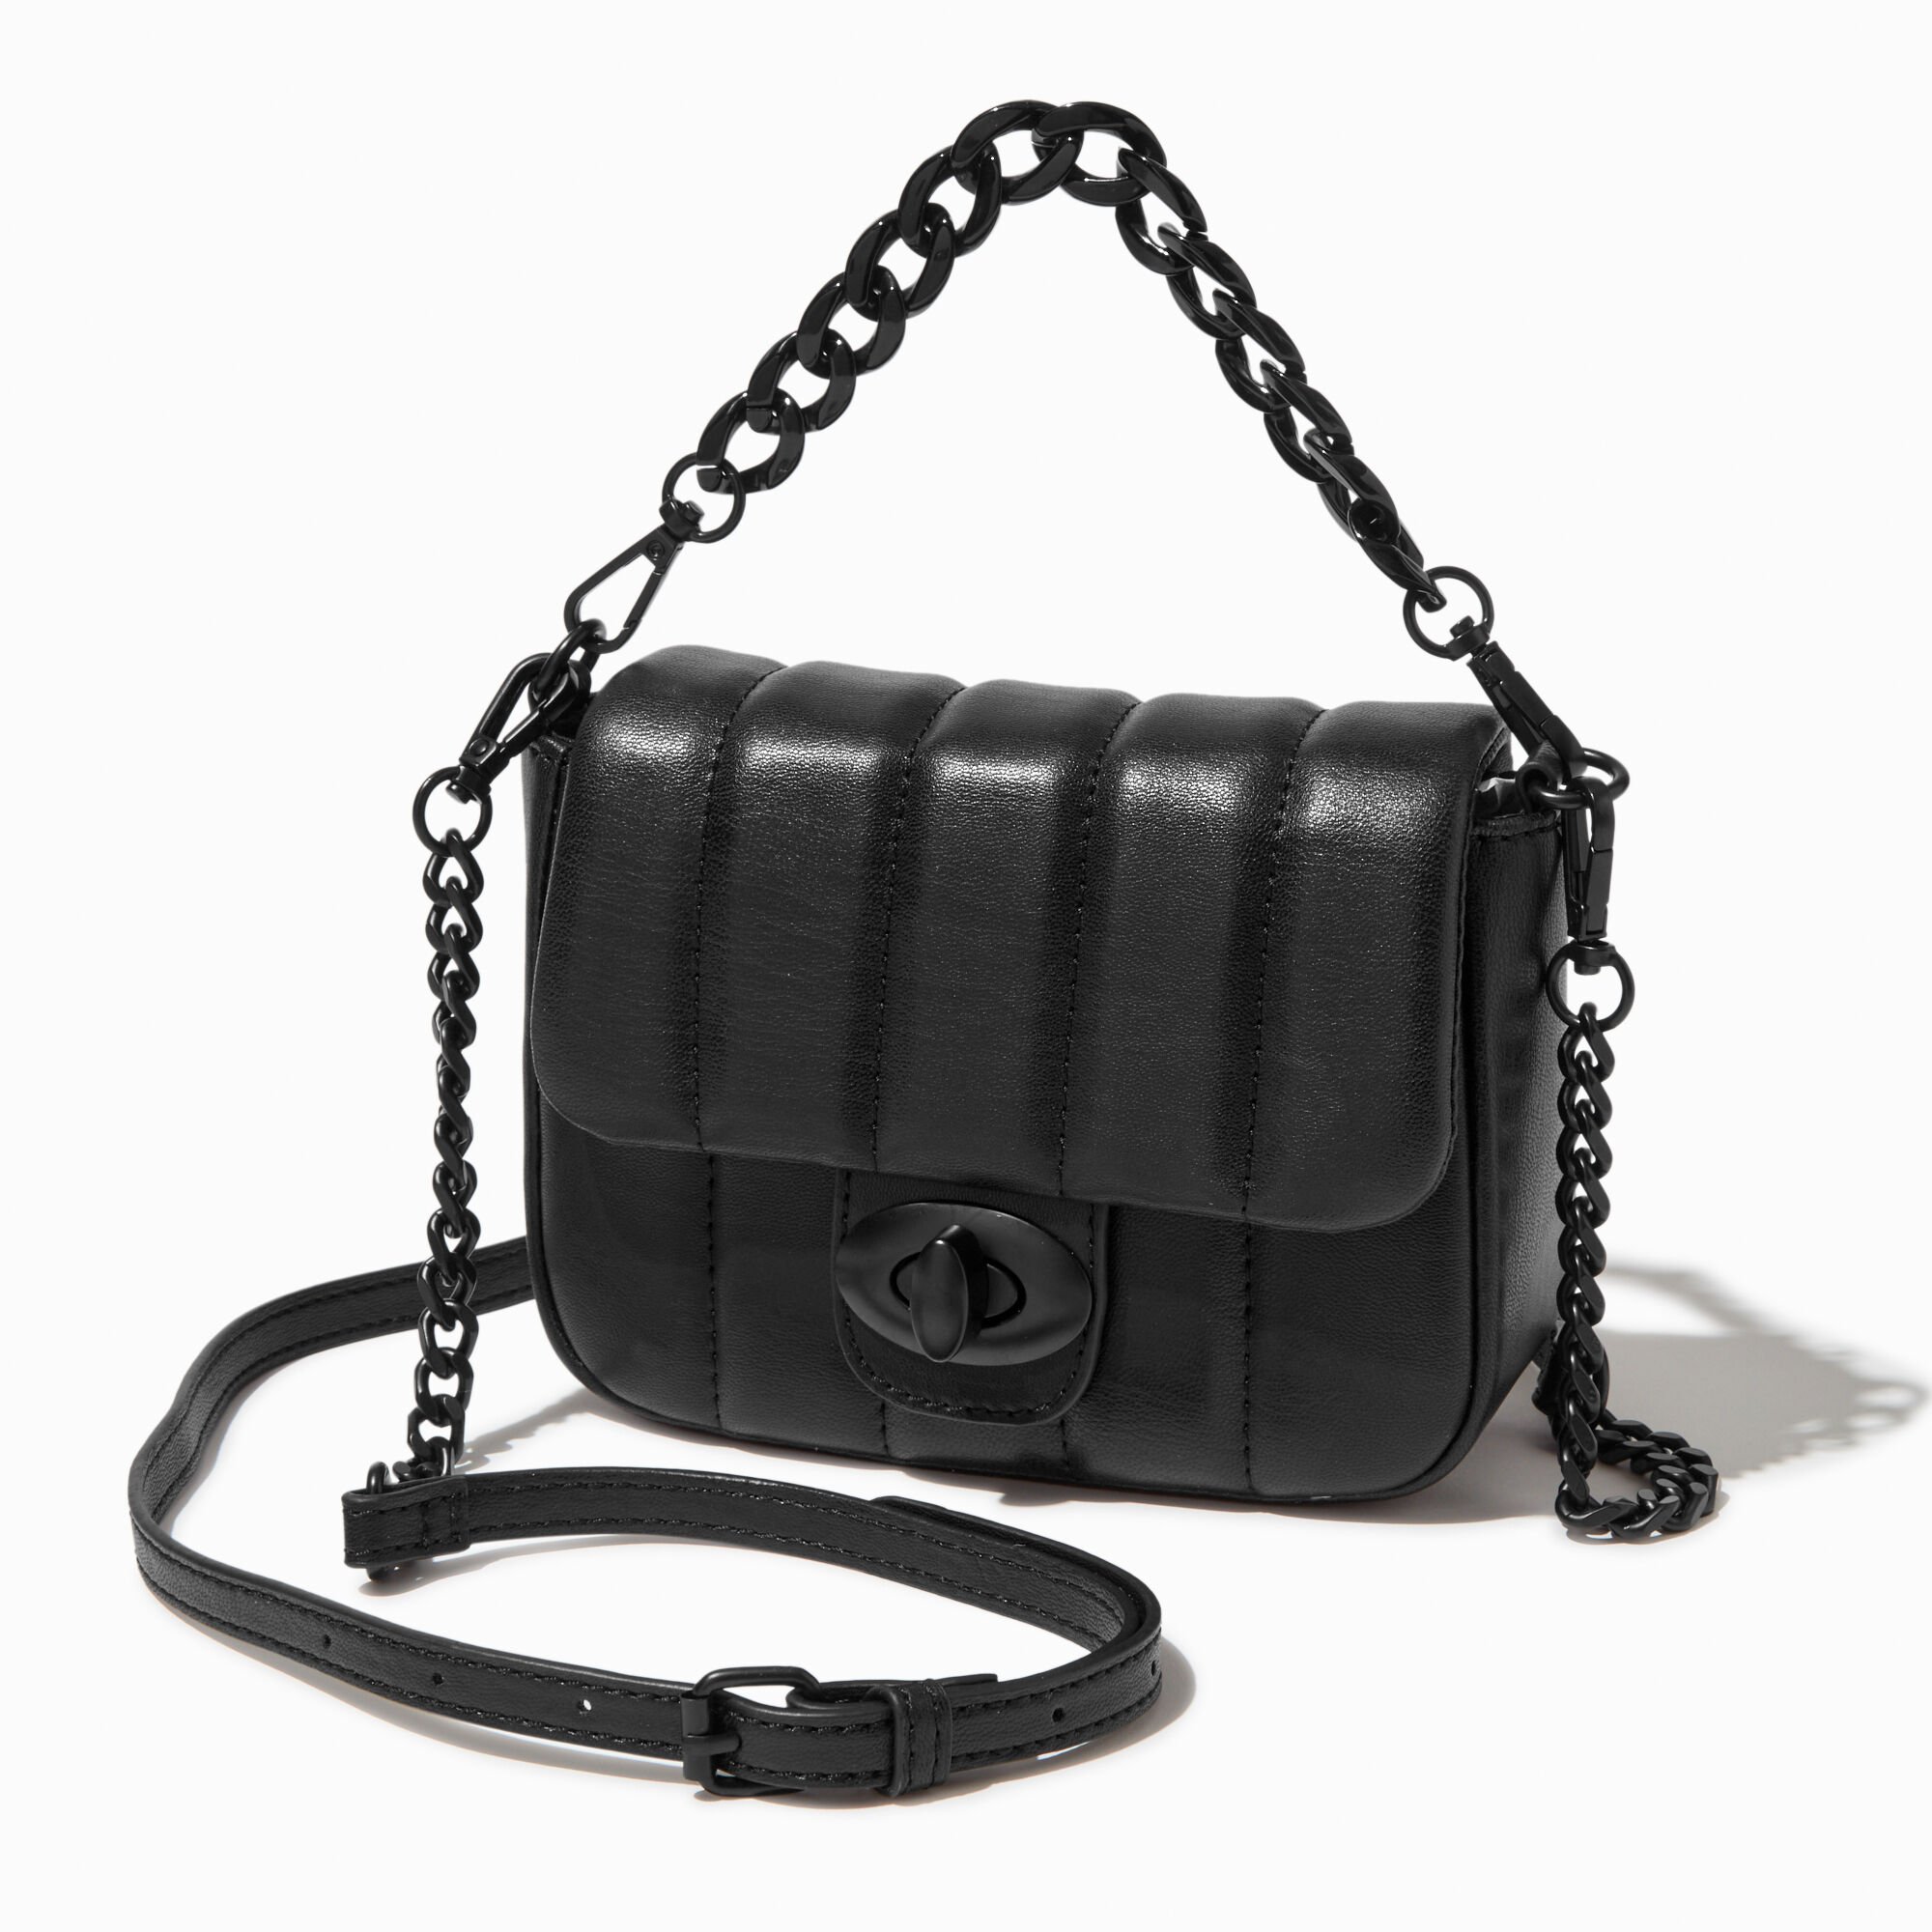 View Claires Chunky Chain Dual Strap Crossbody Bag Black information